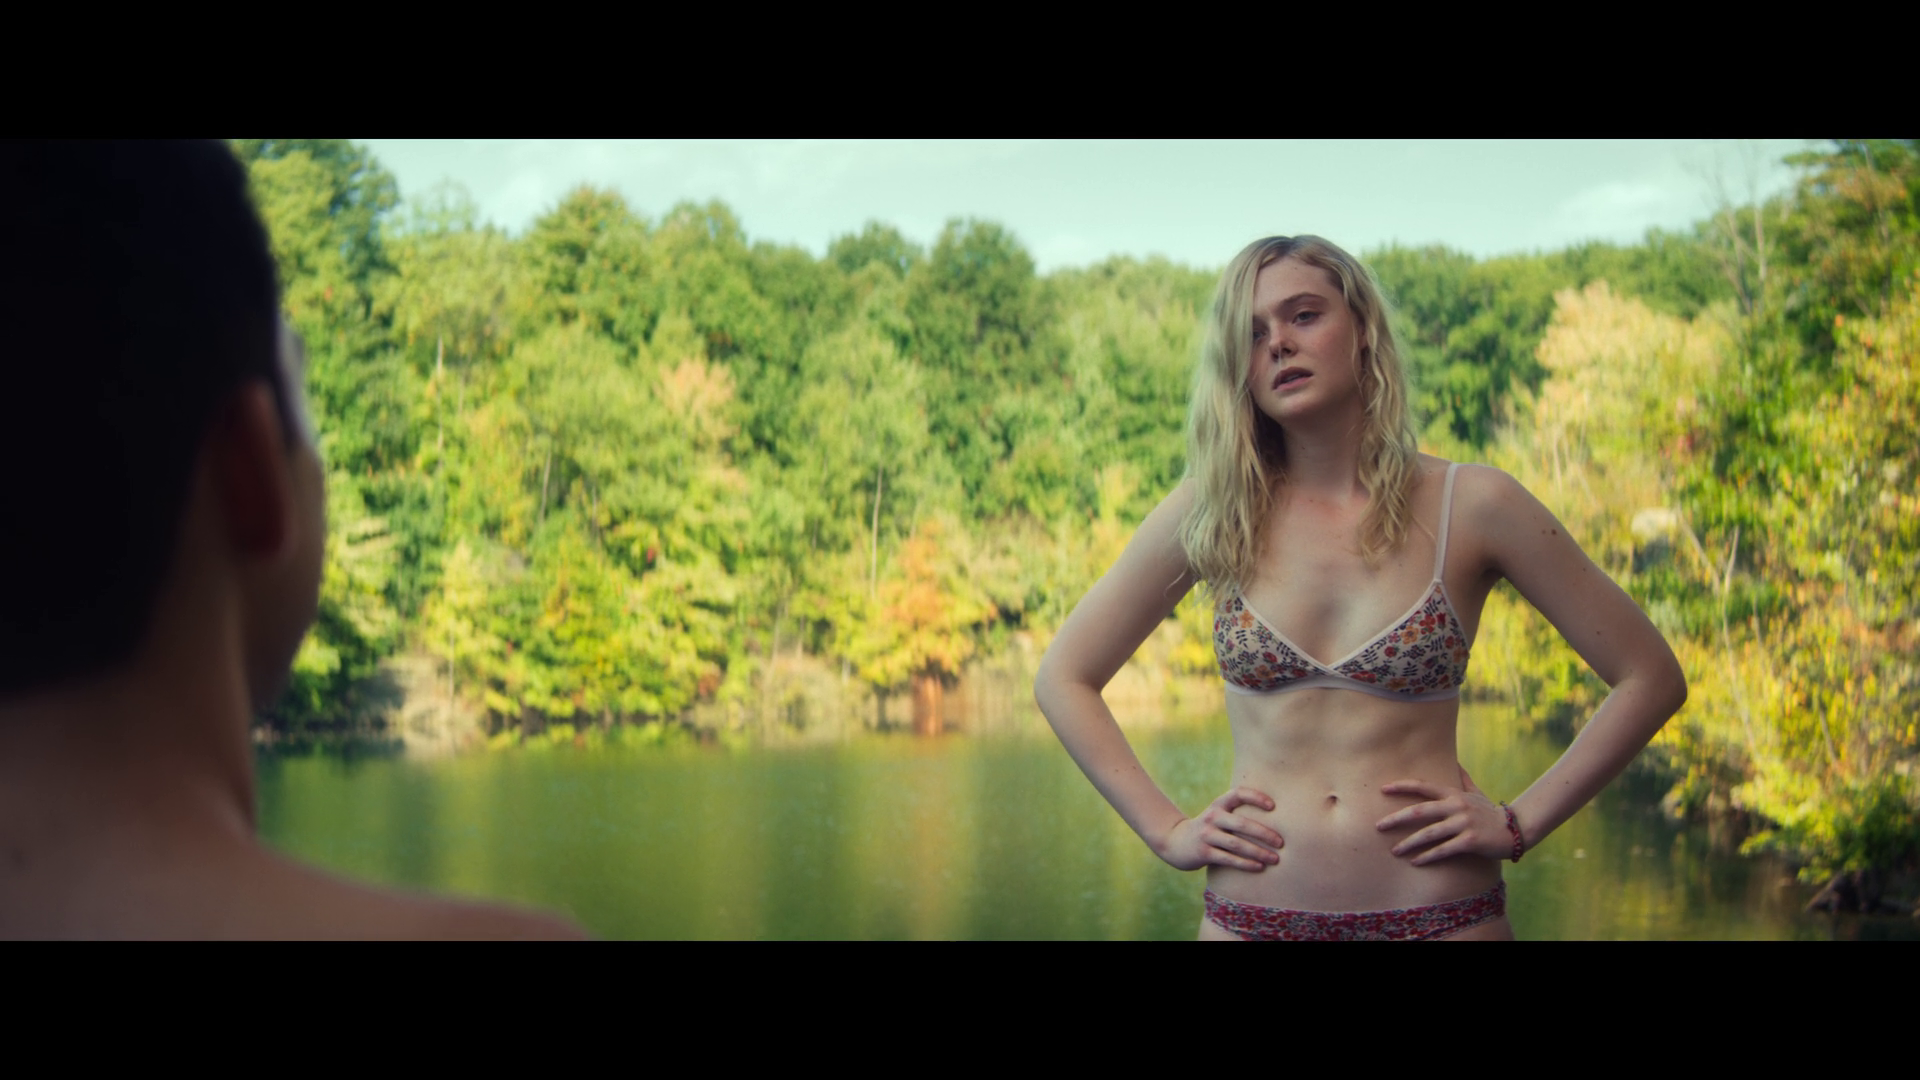 Photos n°3 : Elle Fanning’s Bikini in All the Bright Places